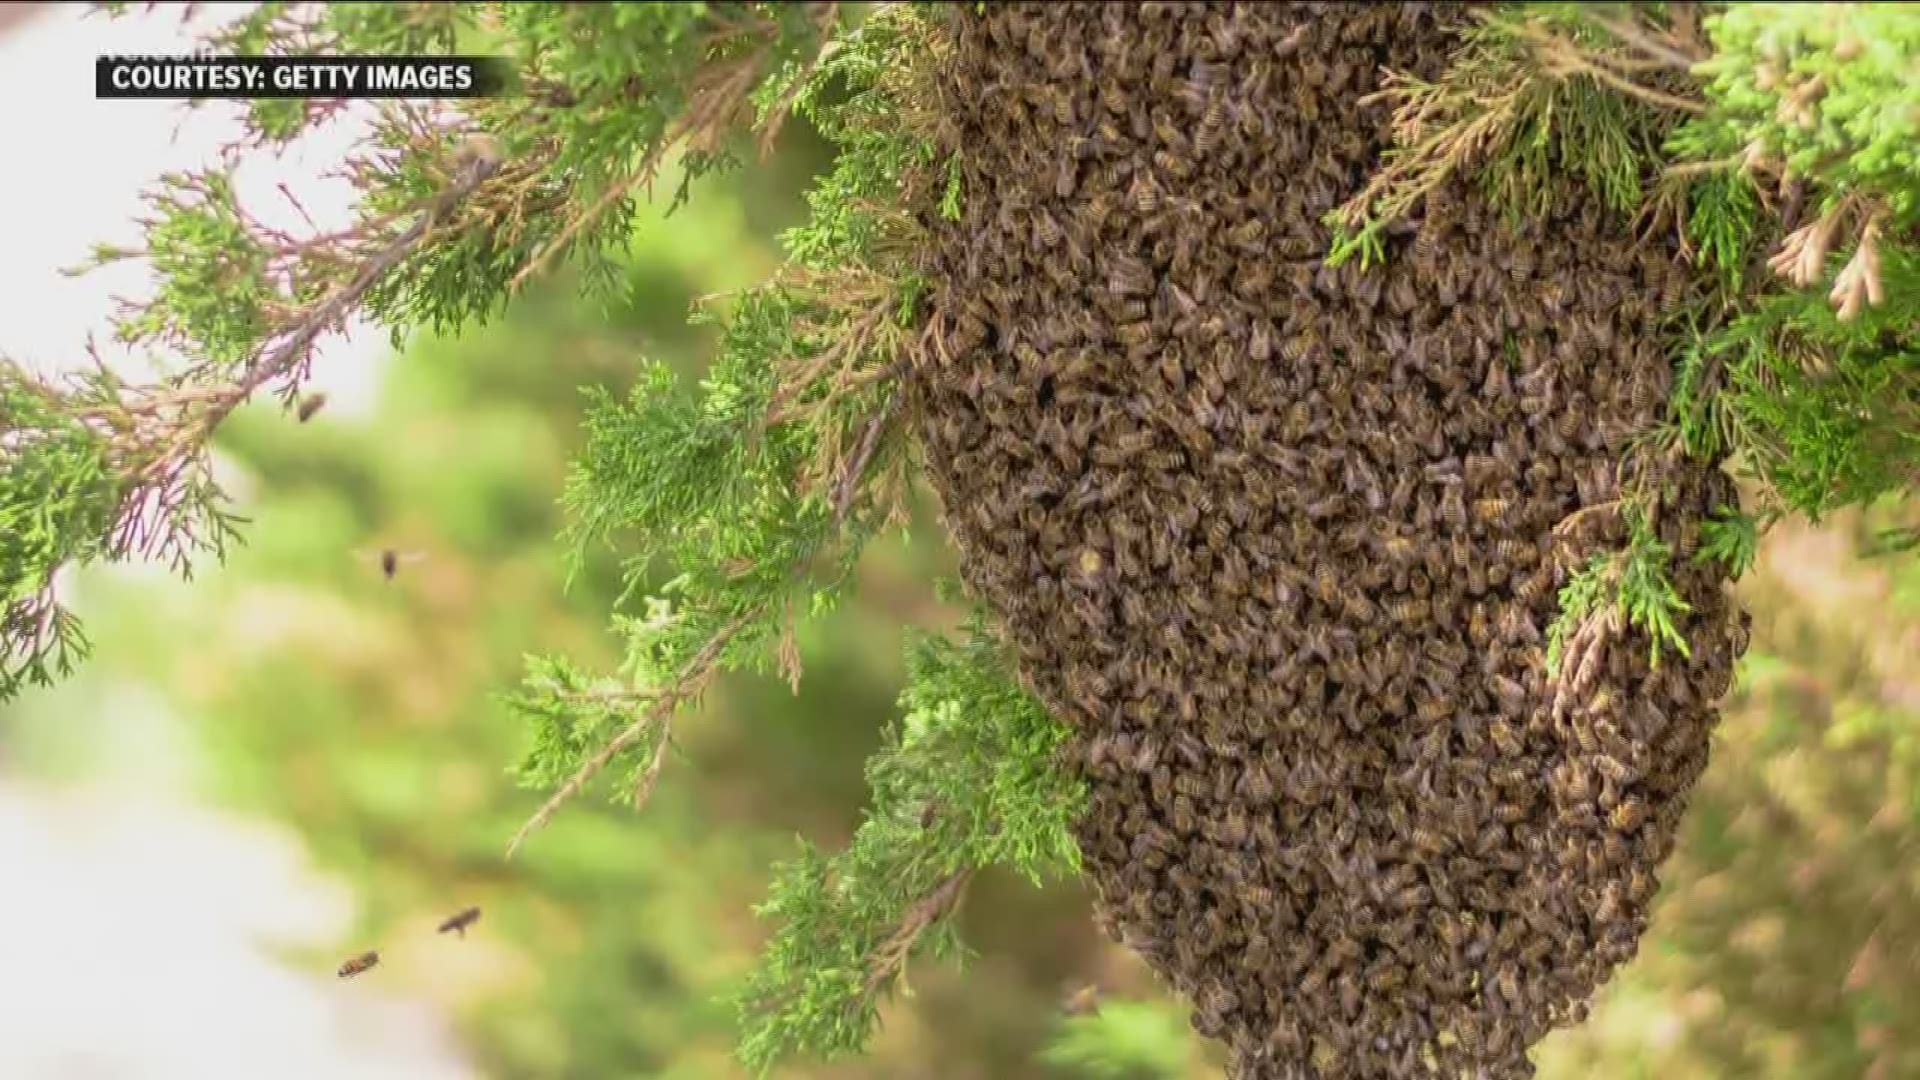 Why Is There No Need To Panic Over A Swarm Of Bees